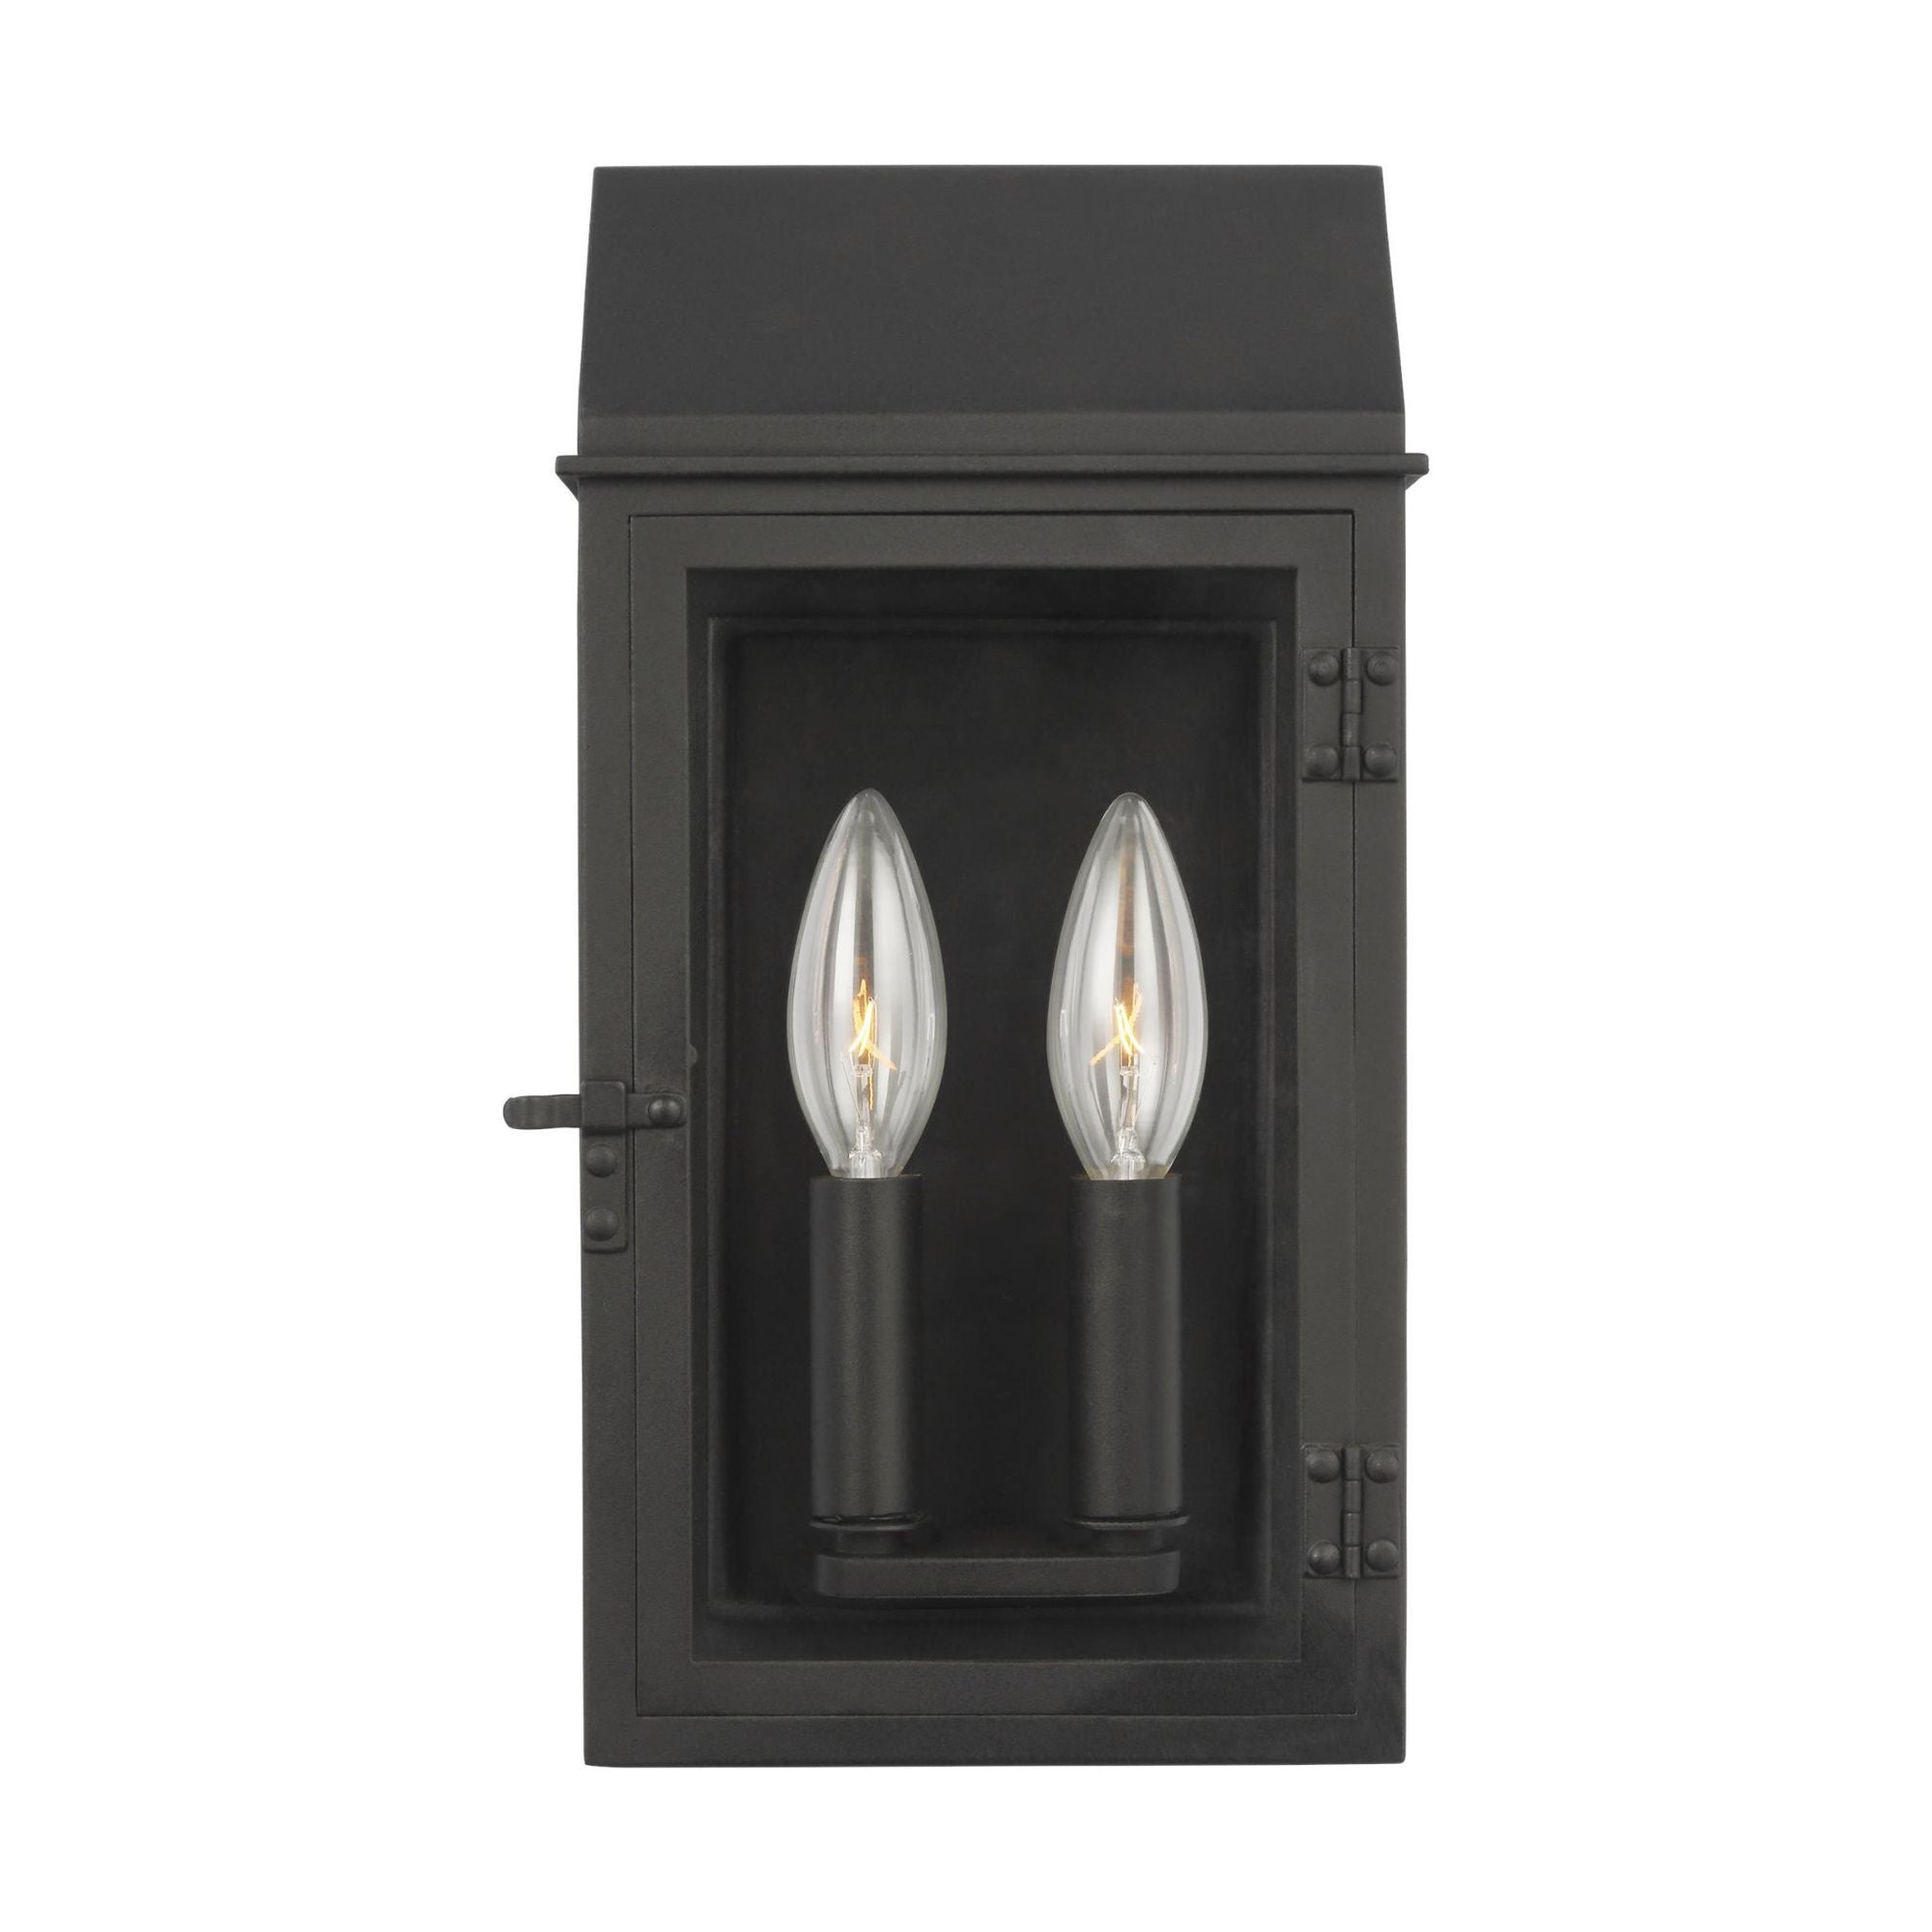 Chapman & Myers Hingham Small Outdoor Wall Lantern in Textured Black